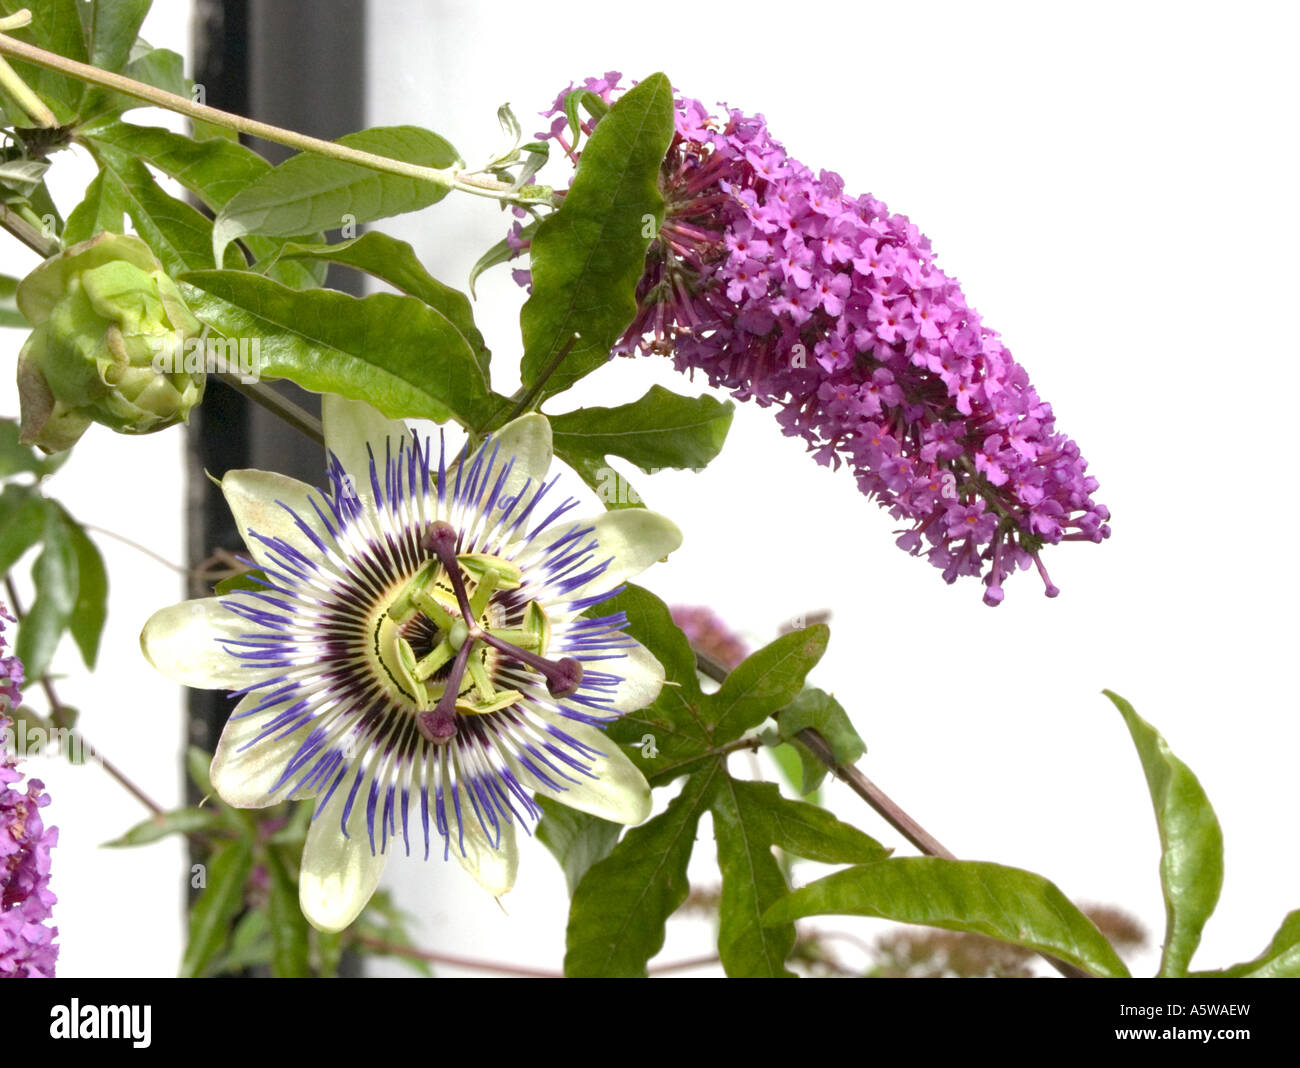 Unusual flower pairing of a passion flower passiflora and purple buddleja in Wiltshire England UK EU Stock Photo